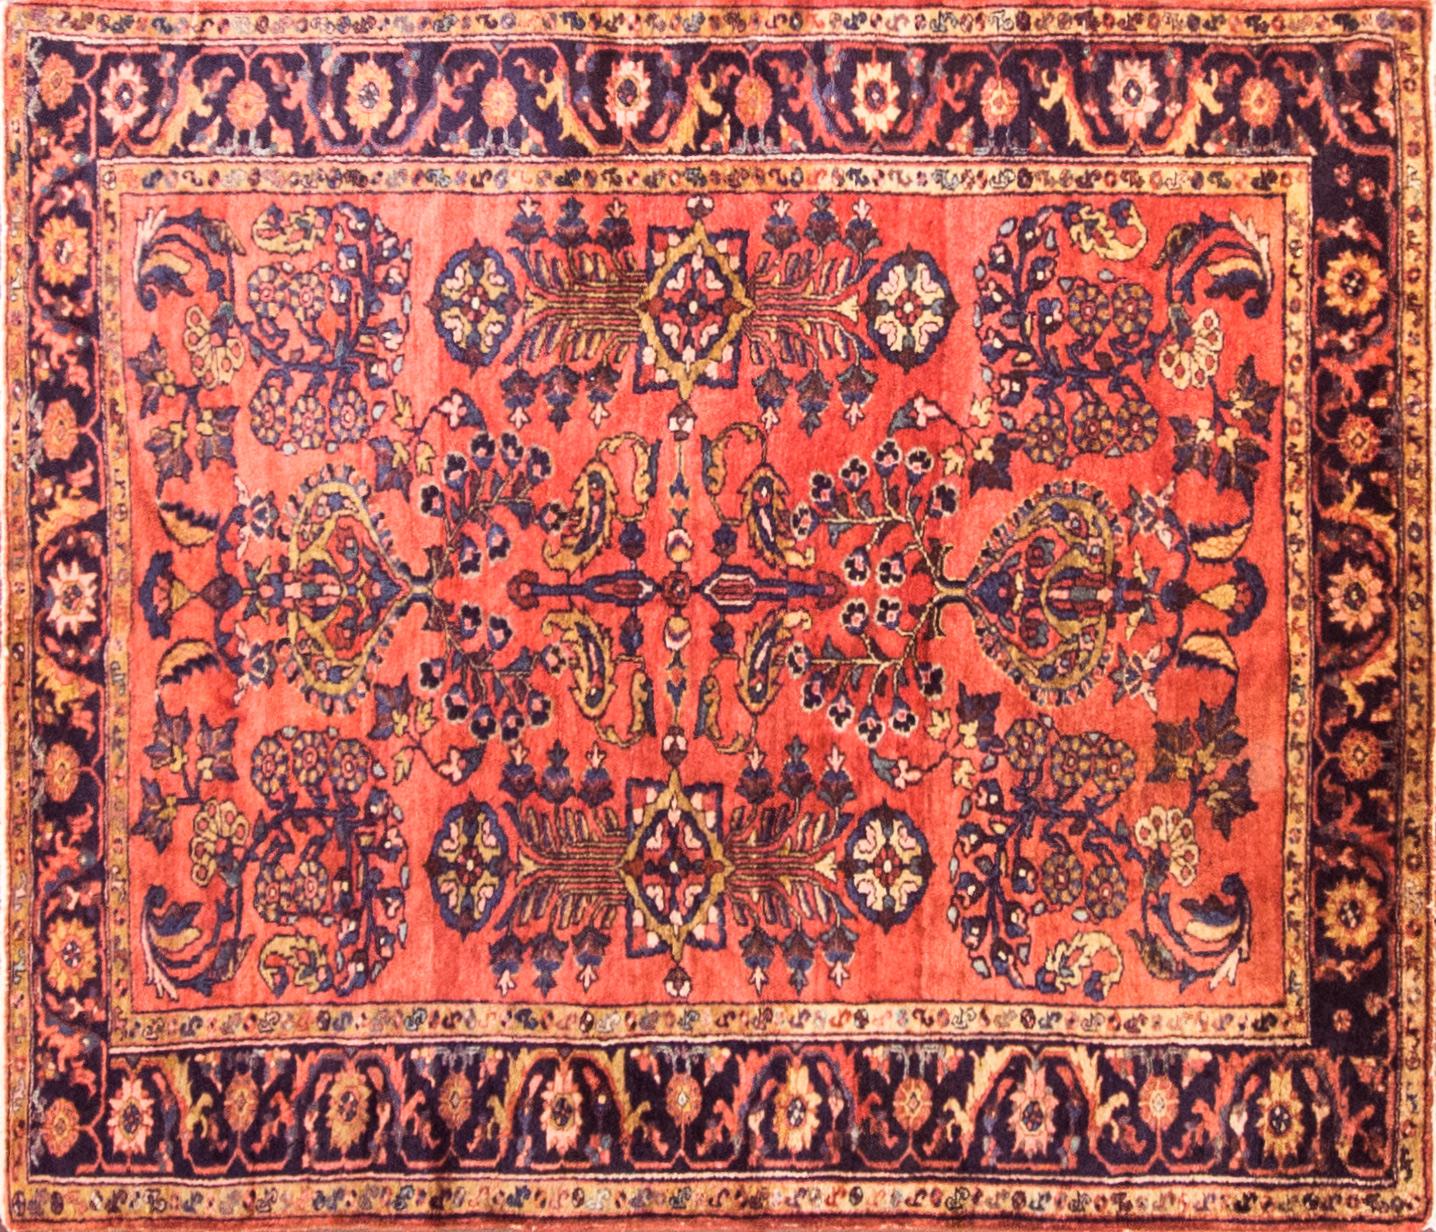 Beautiful colors with fine quality, circa 1920. Handwoven Lilihan rug. Produced south of the city of Arak by Armenians in Persia, Lilihan rugs are known for their design. Traditionally designed with a curvilinear lattice with traditional floral